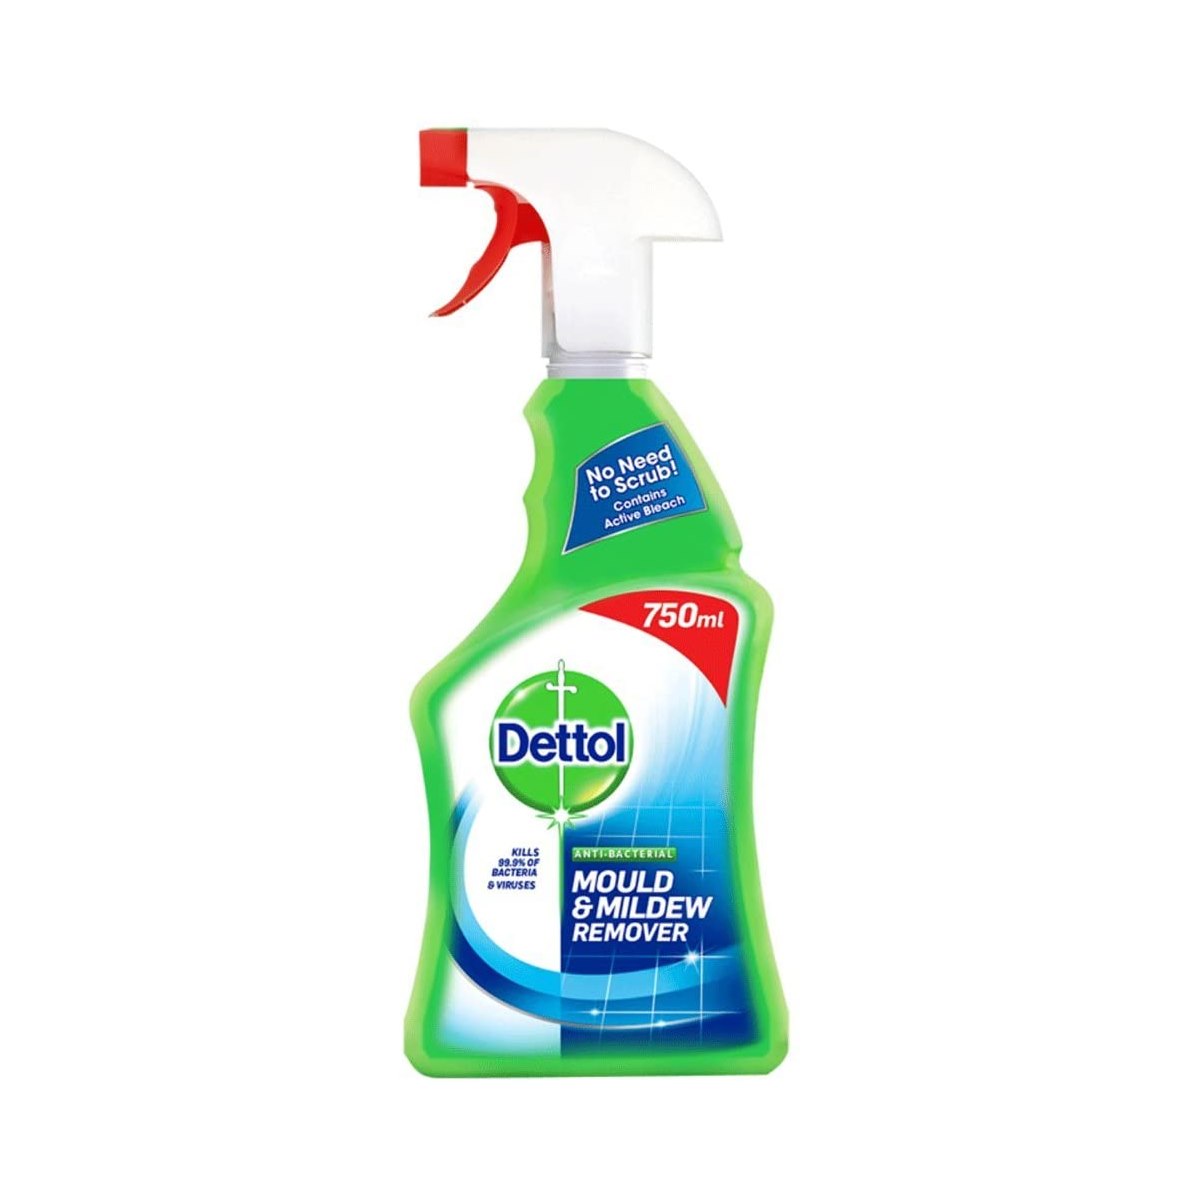 Dettol Anti-Bacterial Mould and Mildew Remover Spray 750ml